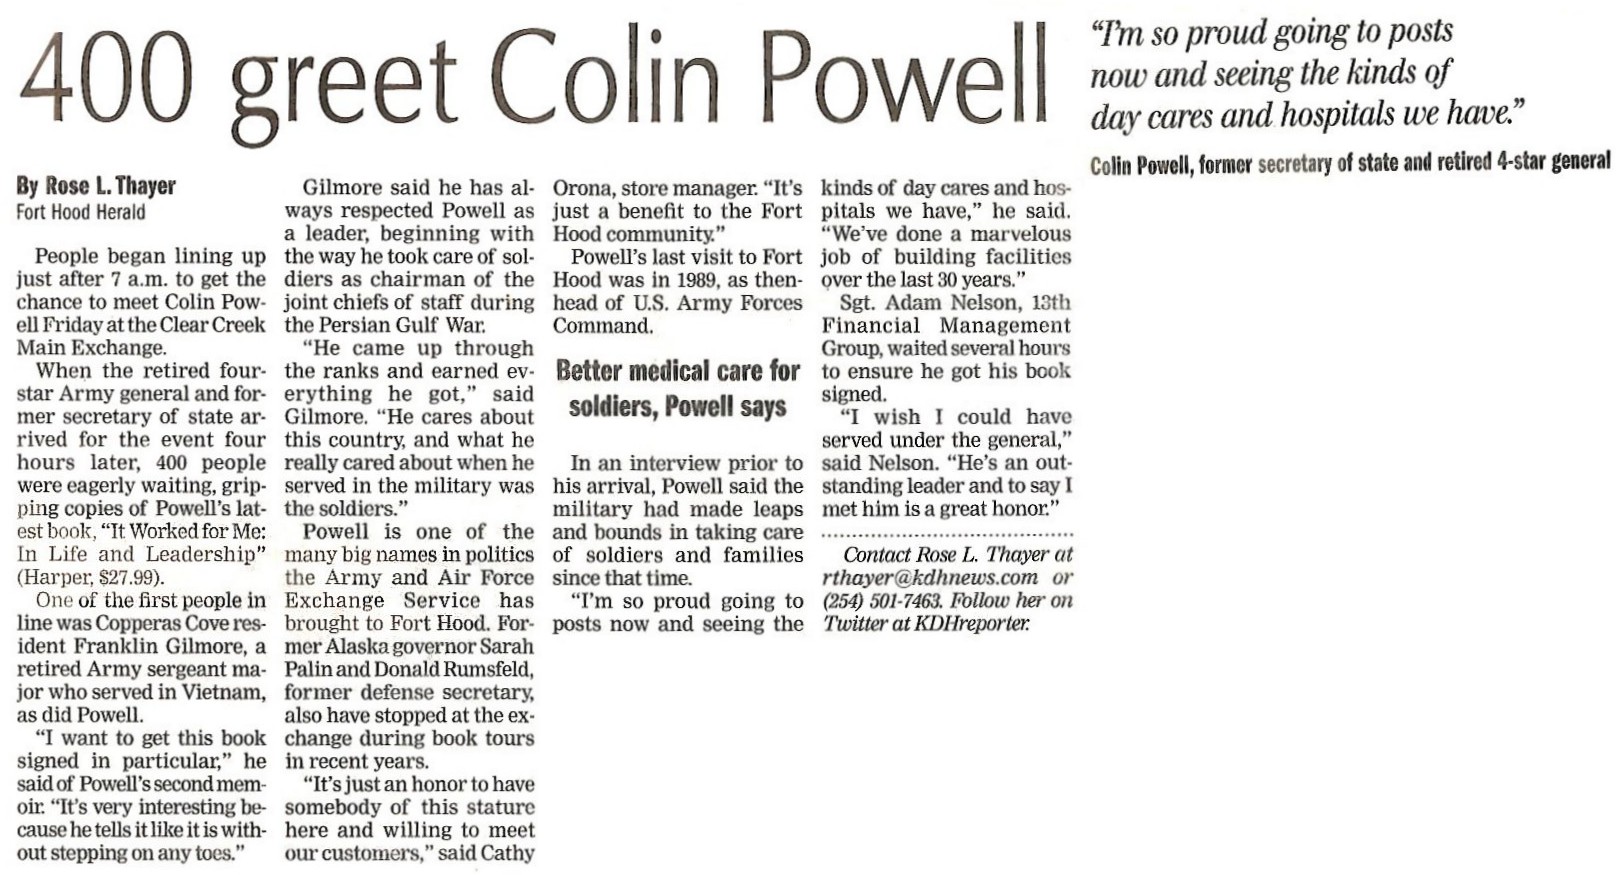 Colin Powell visits Fort Hood